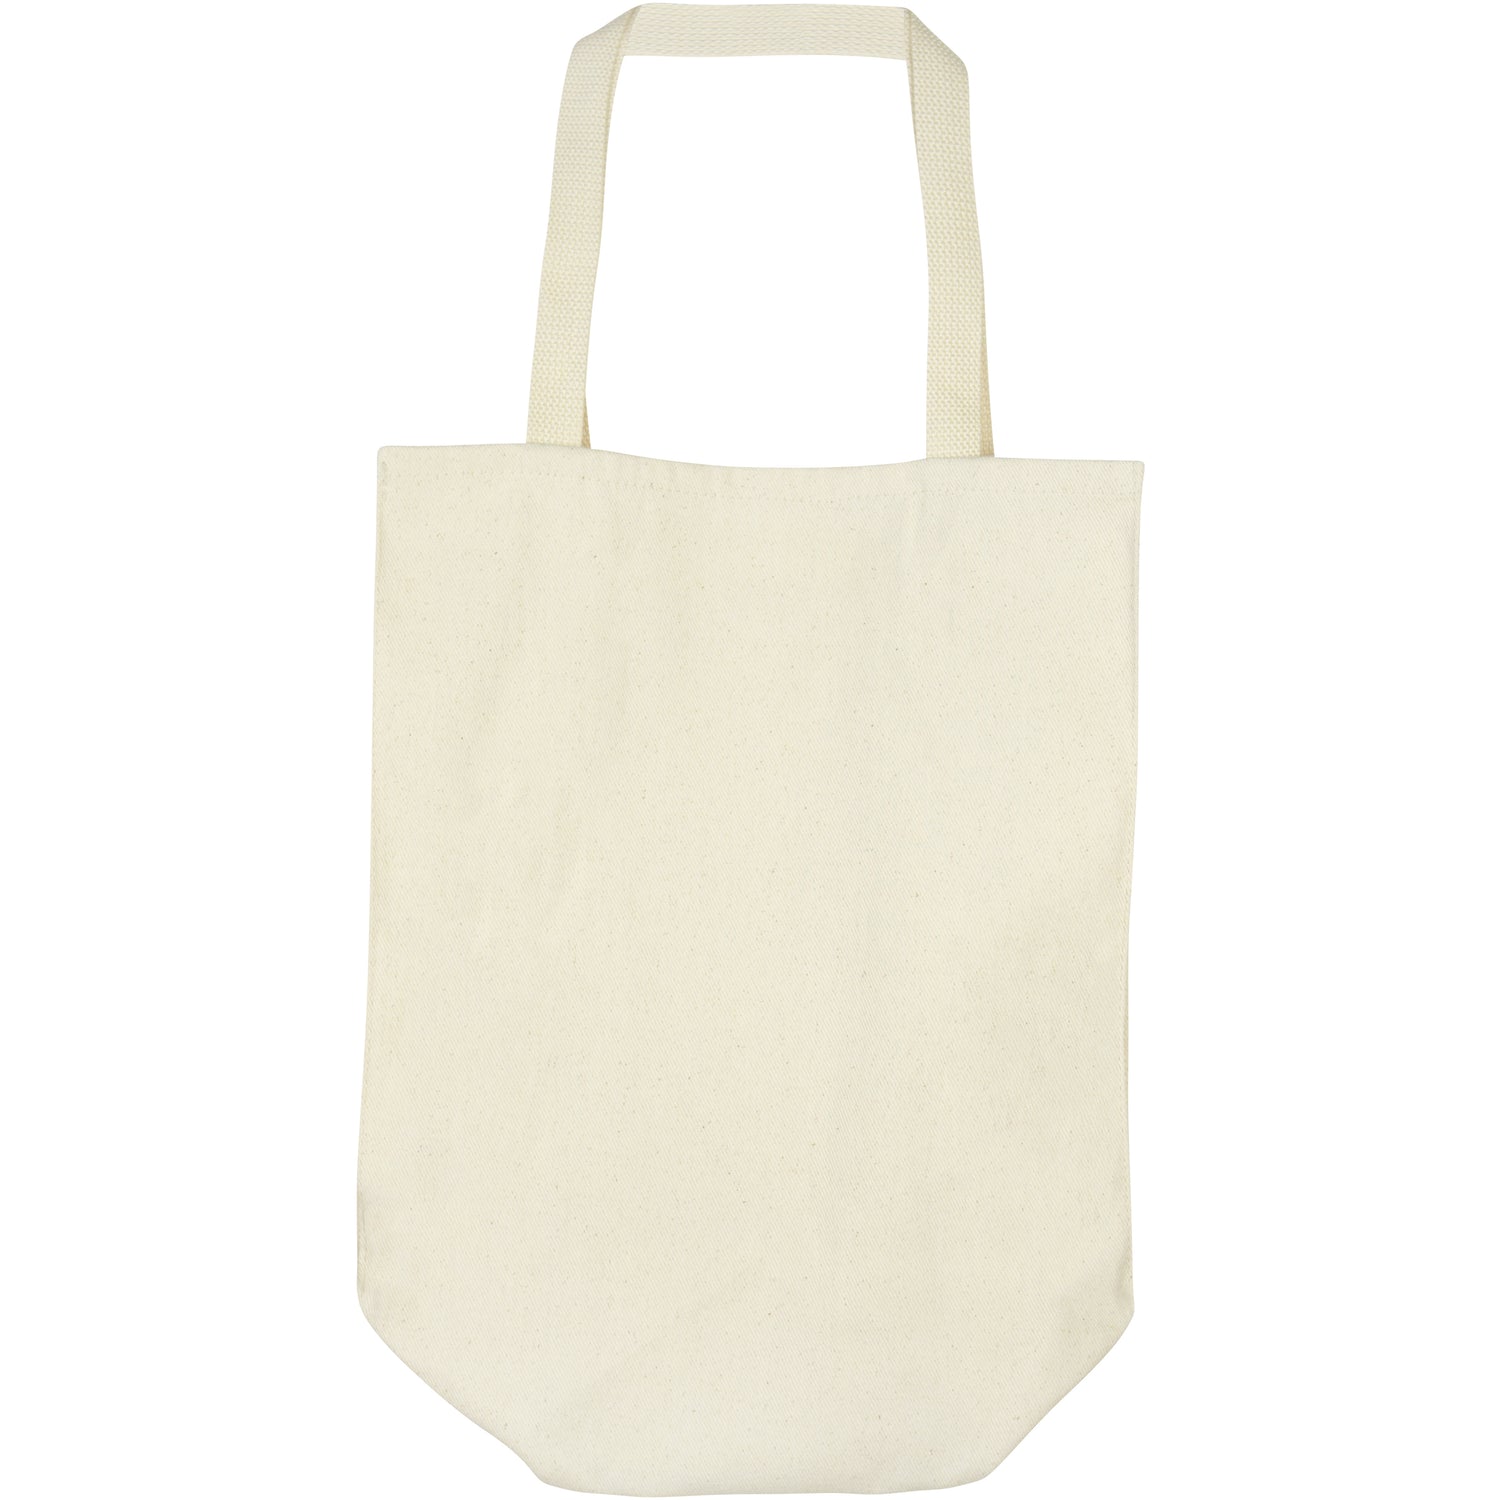 BOLINAS PEOPLE'S STORE CANVAS BAG